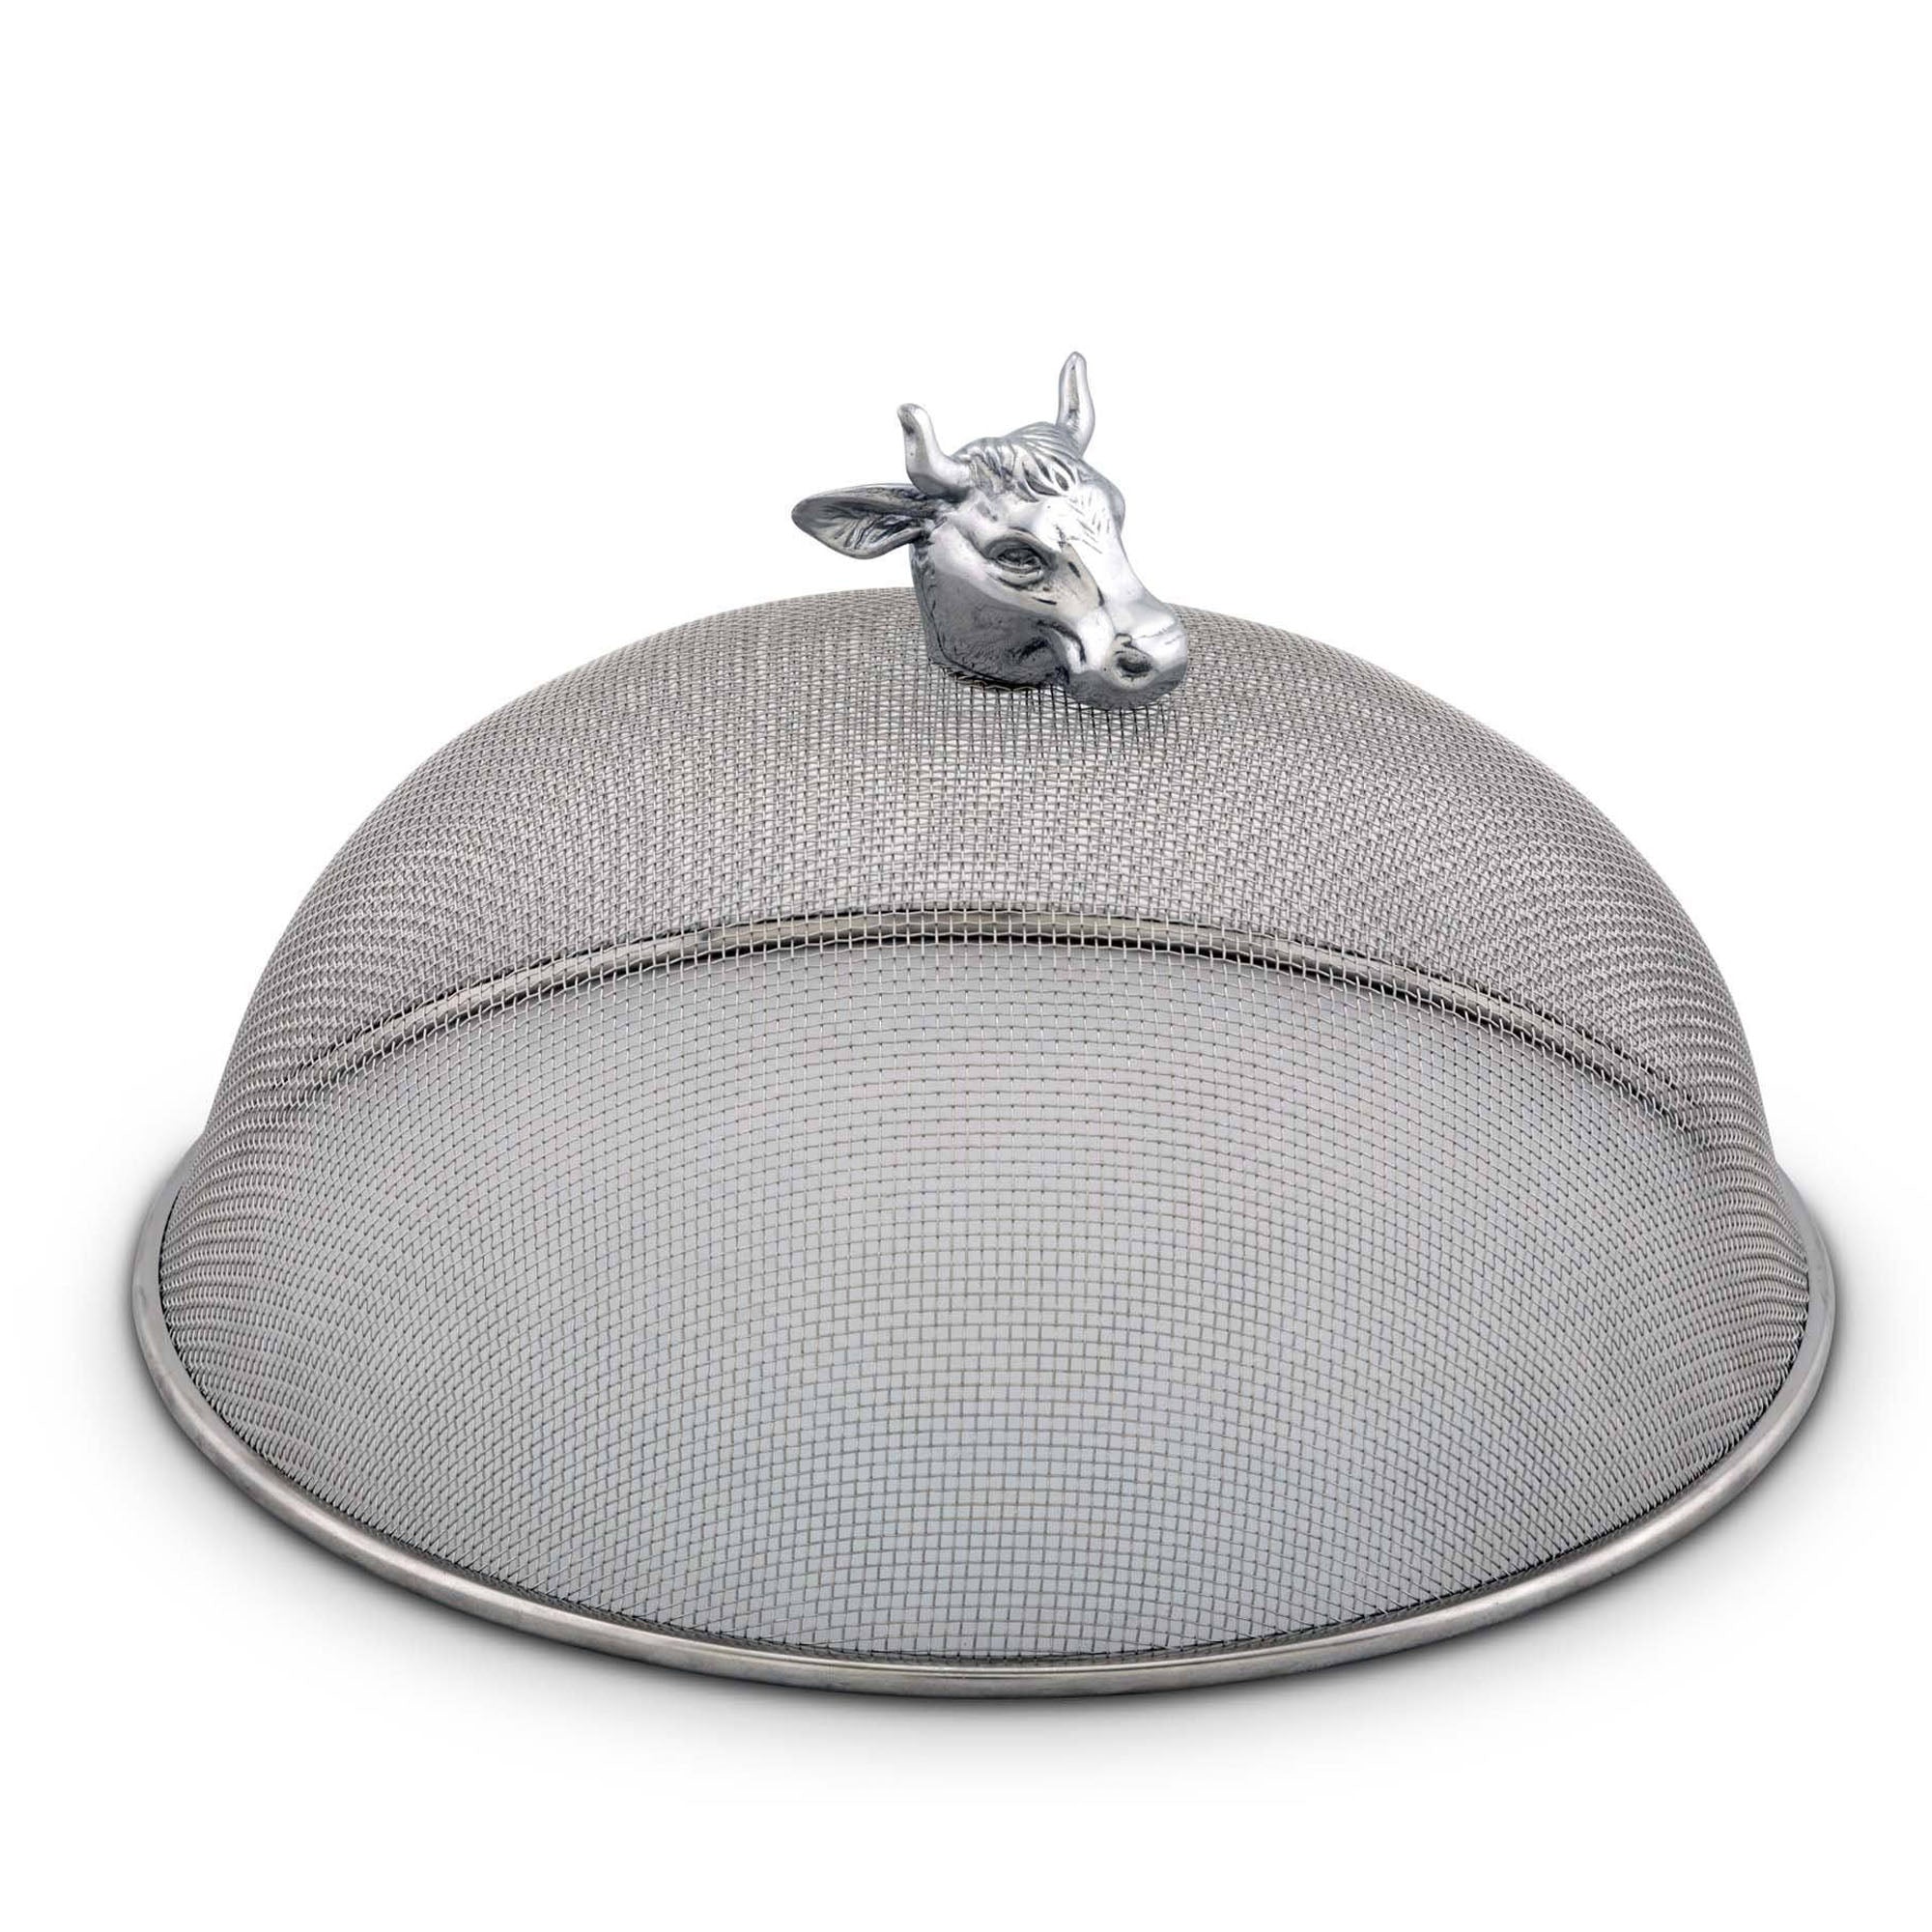 Arthur Court Cow Head Stainless Mesh Picnic Cover Product Image